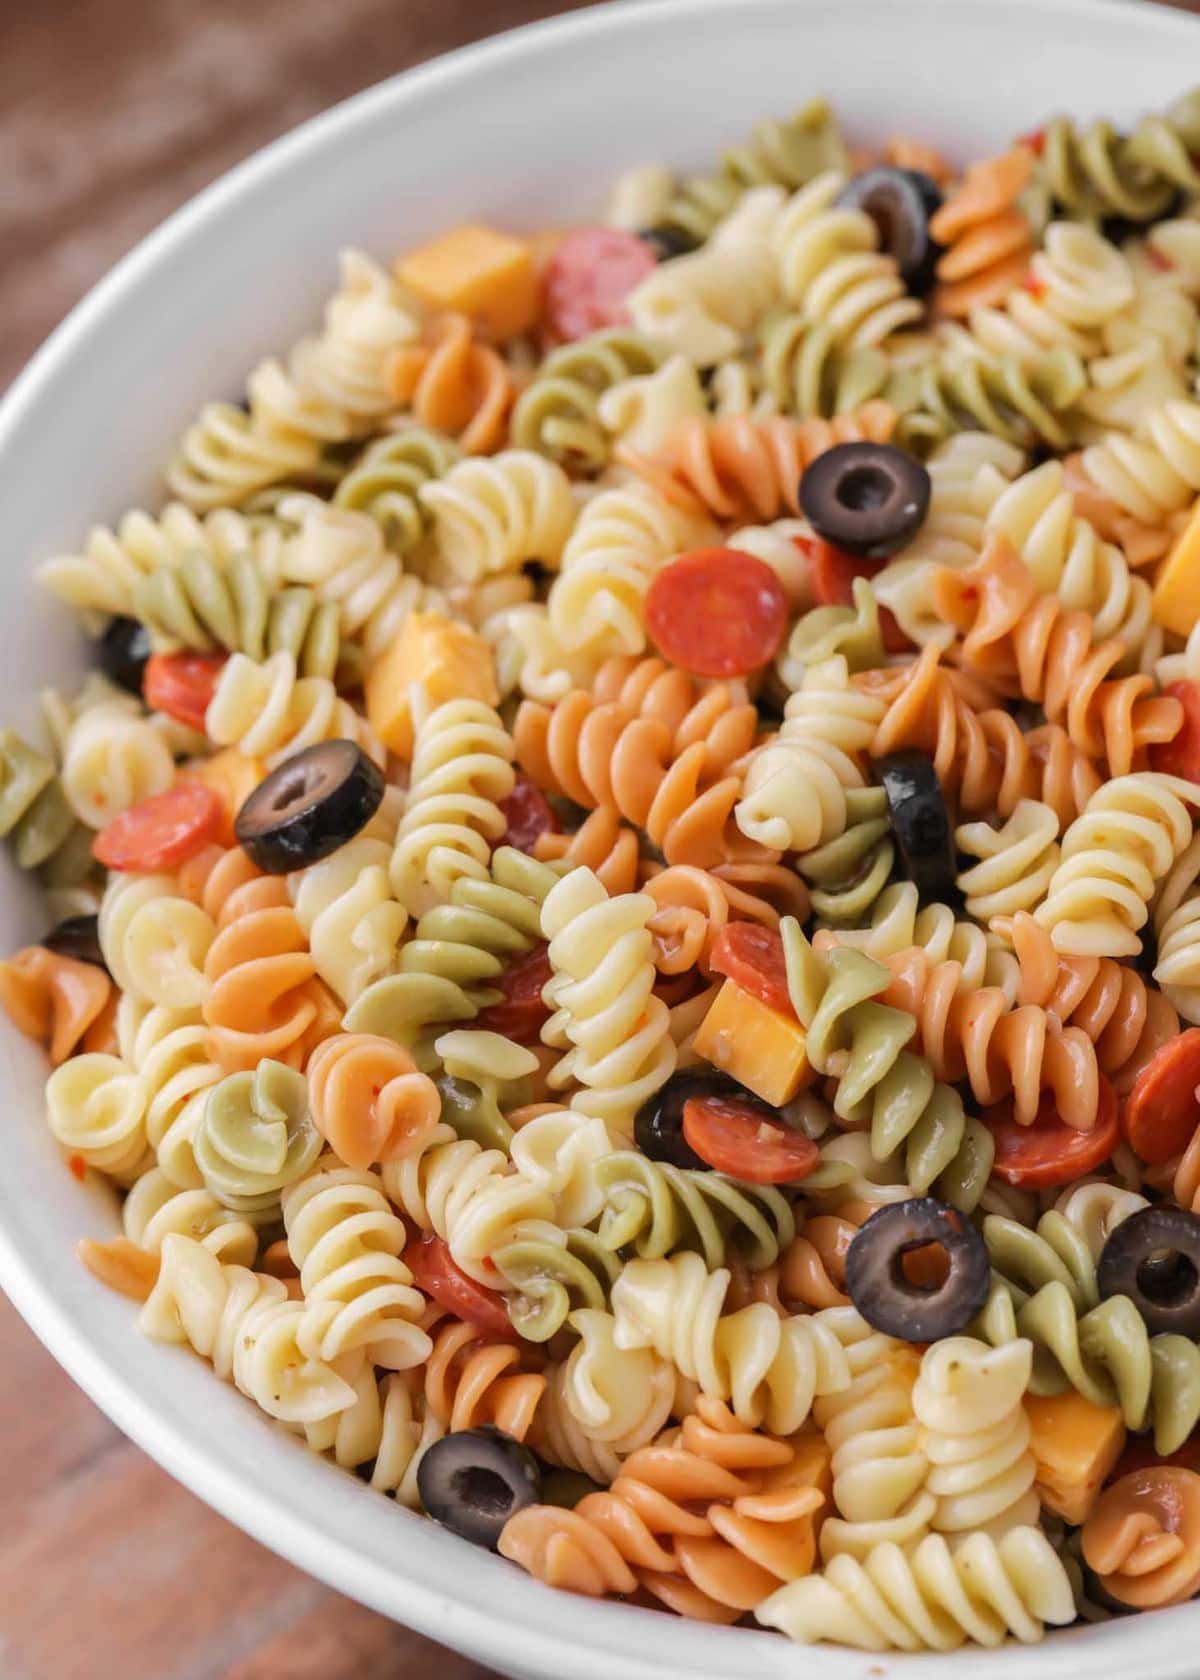 Easy Pasta Salad Recipe With Italian Dressing Video Lil Luna,Things You Need For A Housewarming Party